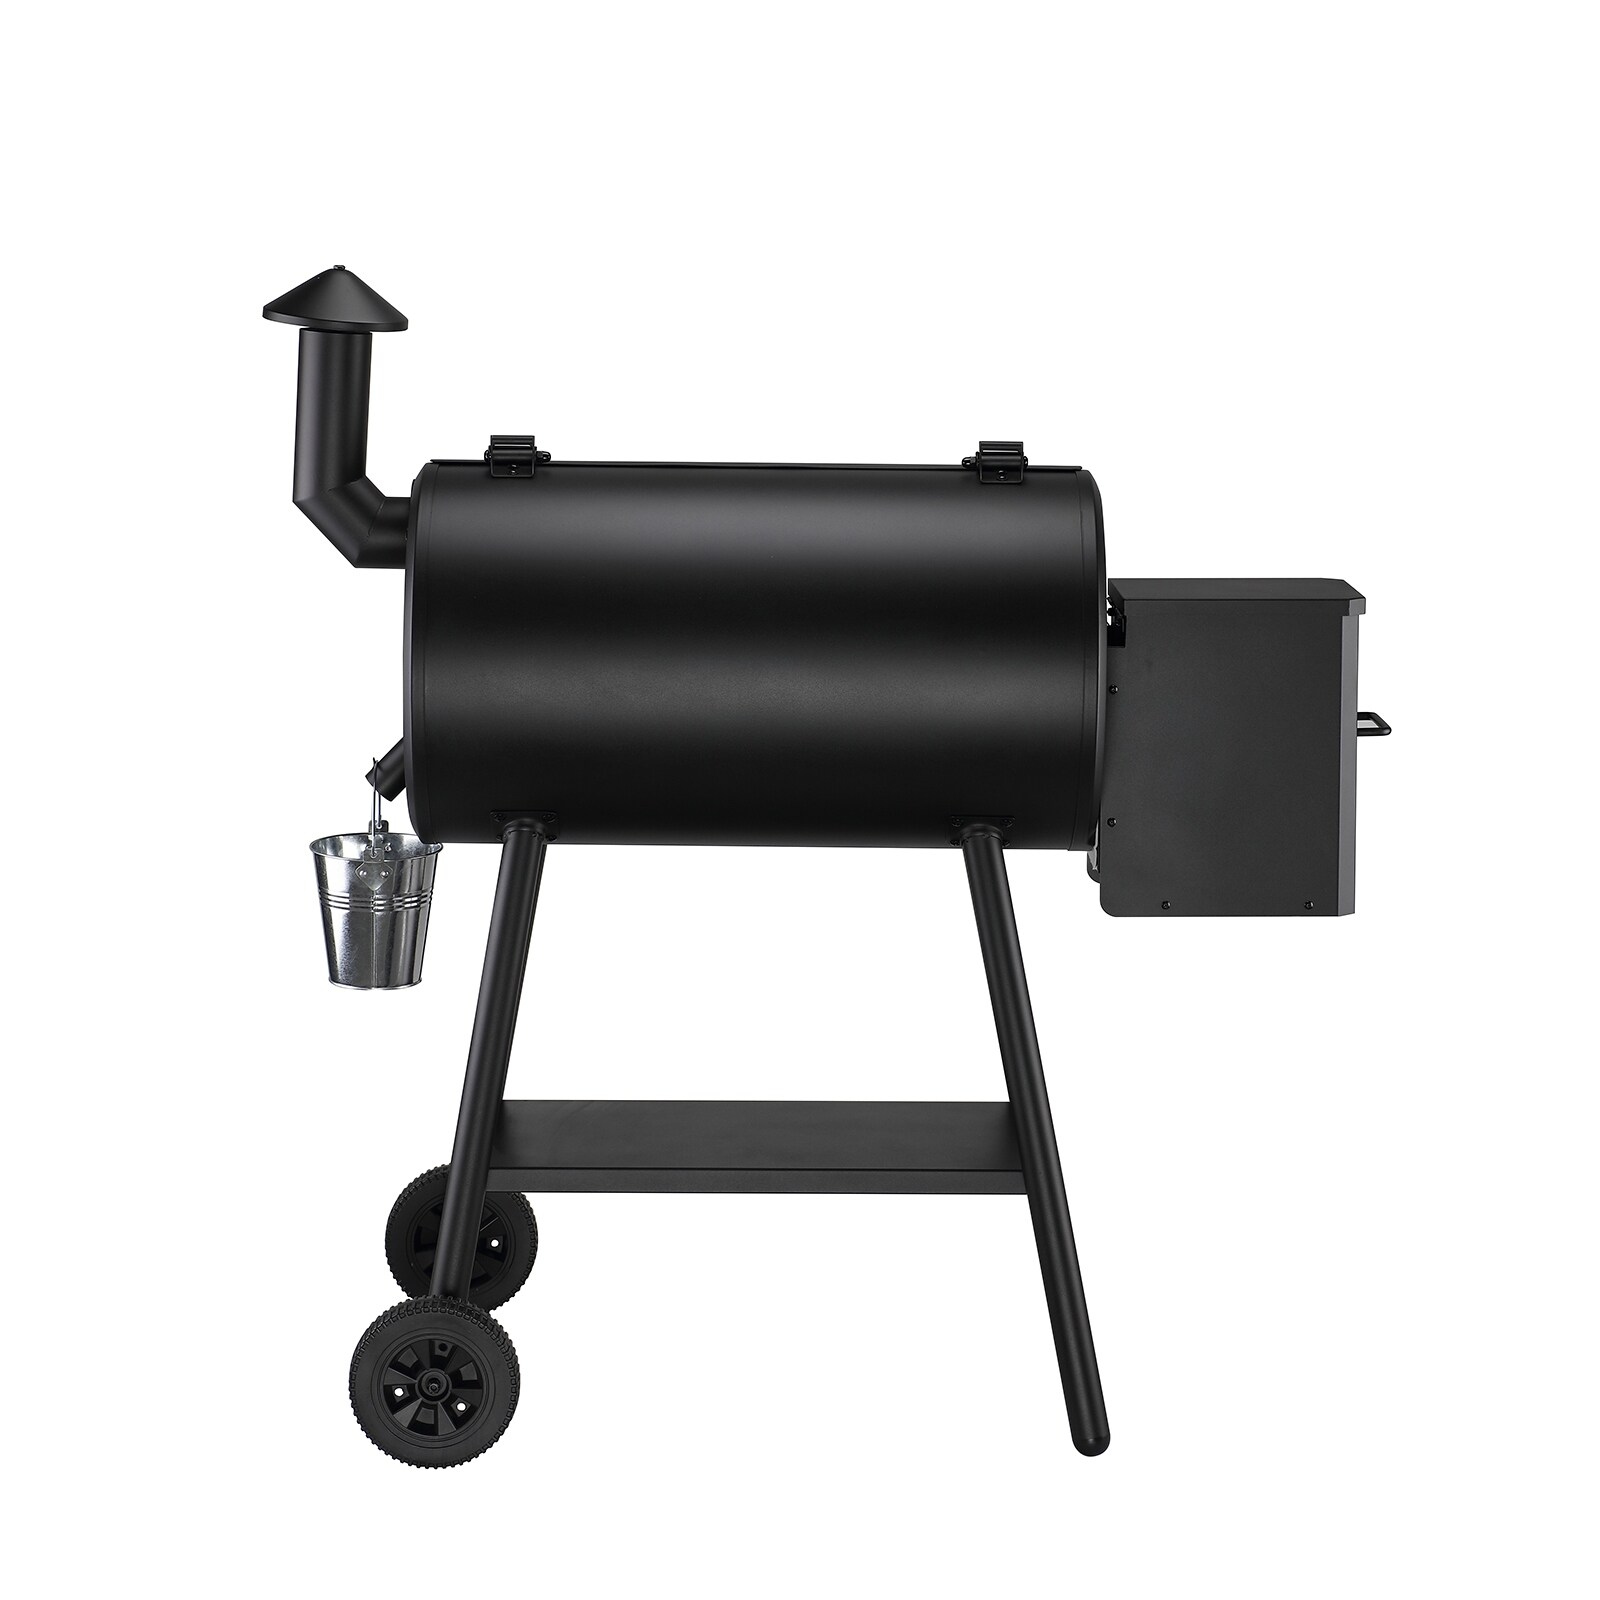 https://ak1.ostkcdn.com/images/products/is/images/direct/2695c414b7ee925973260590247465ba2226b098/Z-GRILLS-Wood-Pellet-Grill-%26-Smoker%2C-8-in-1-BBQ-Grill-Auto-Temperature-Control-ZPG-5502H.jpg